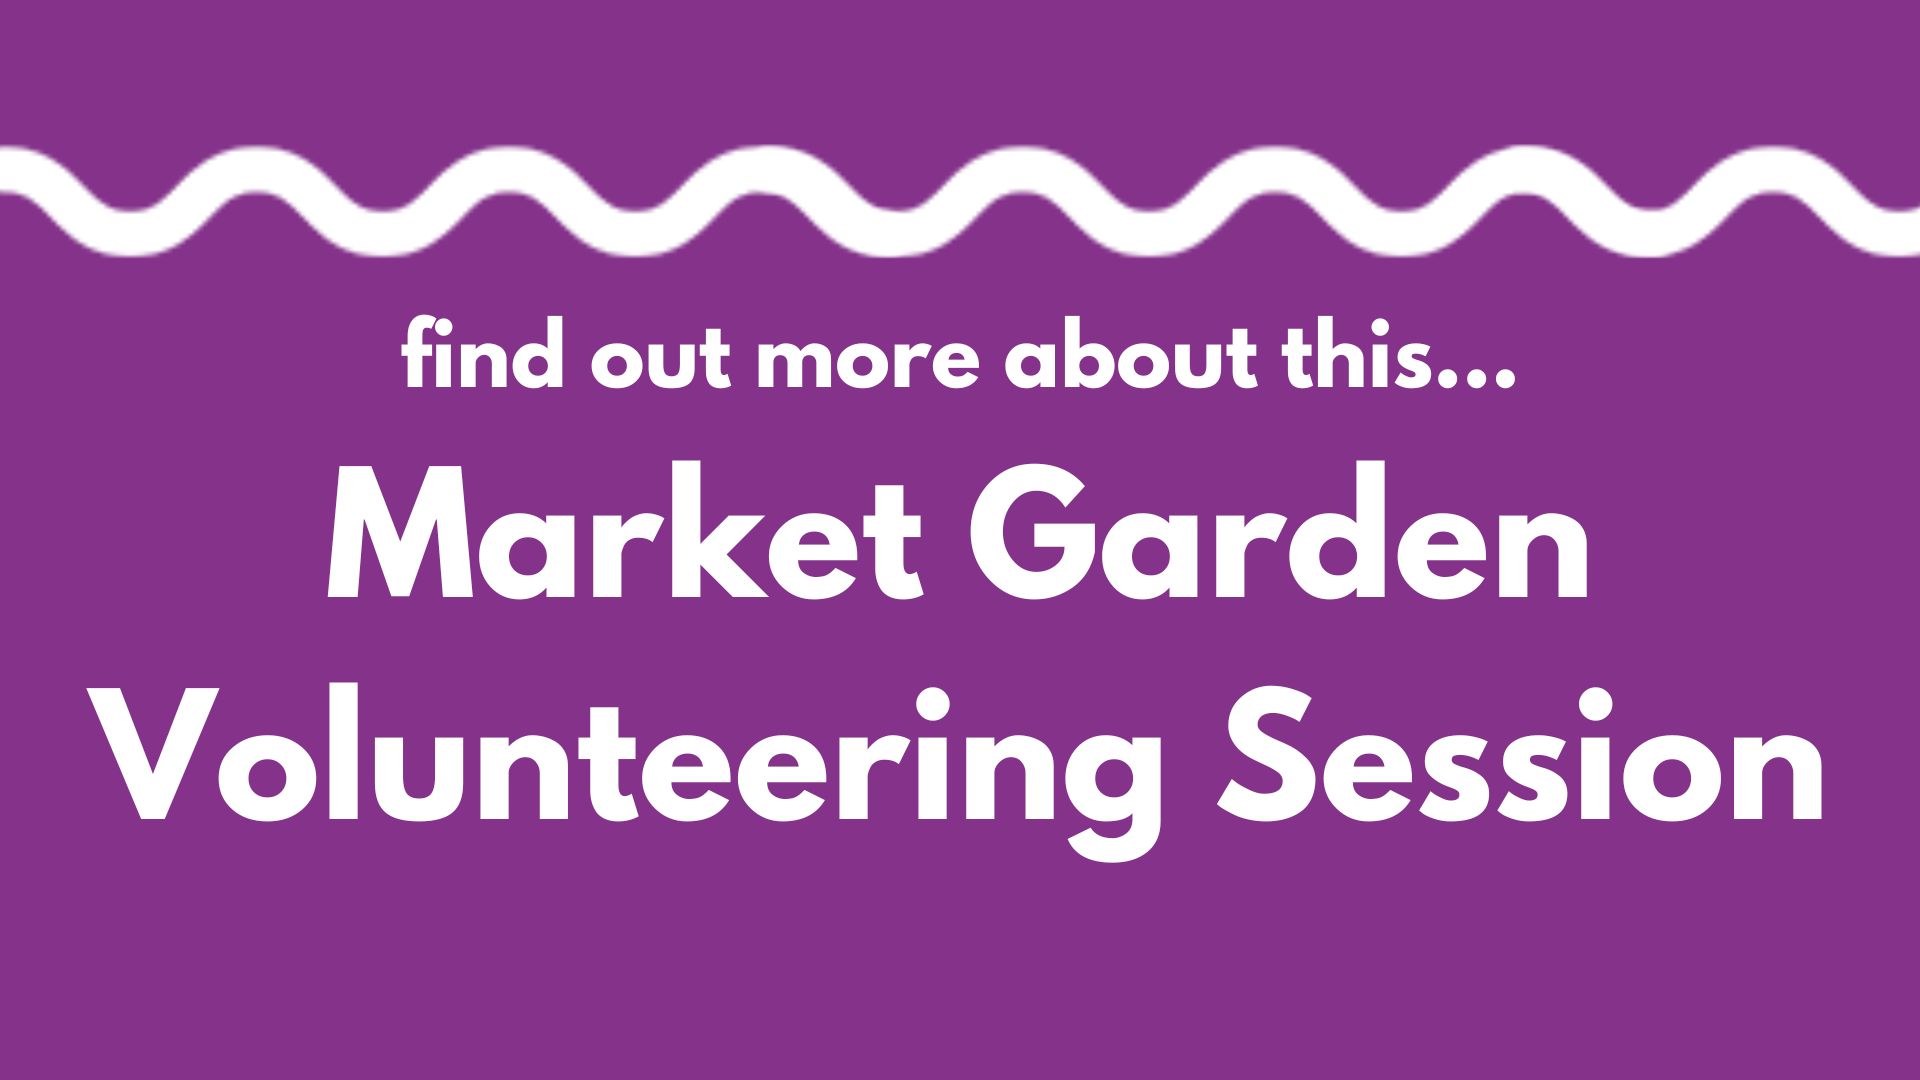 A white wavy line on a purple background above the words: Find out more about this... Market Garden Volunteering Session